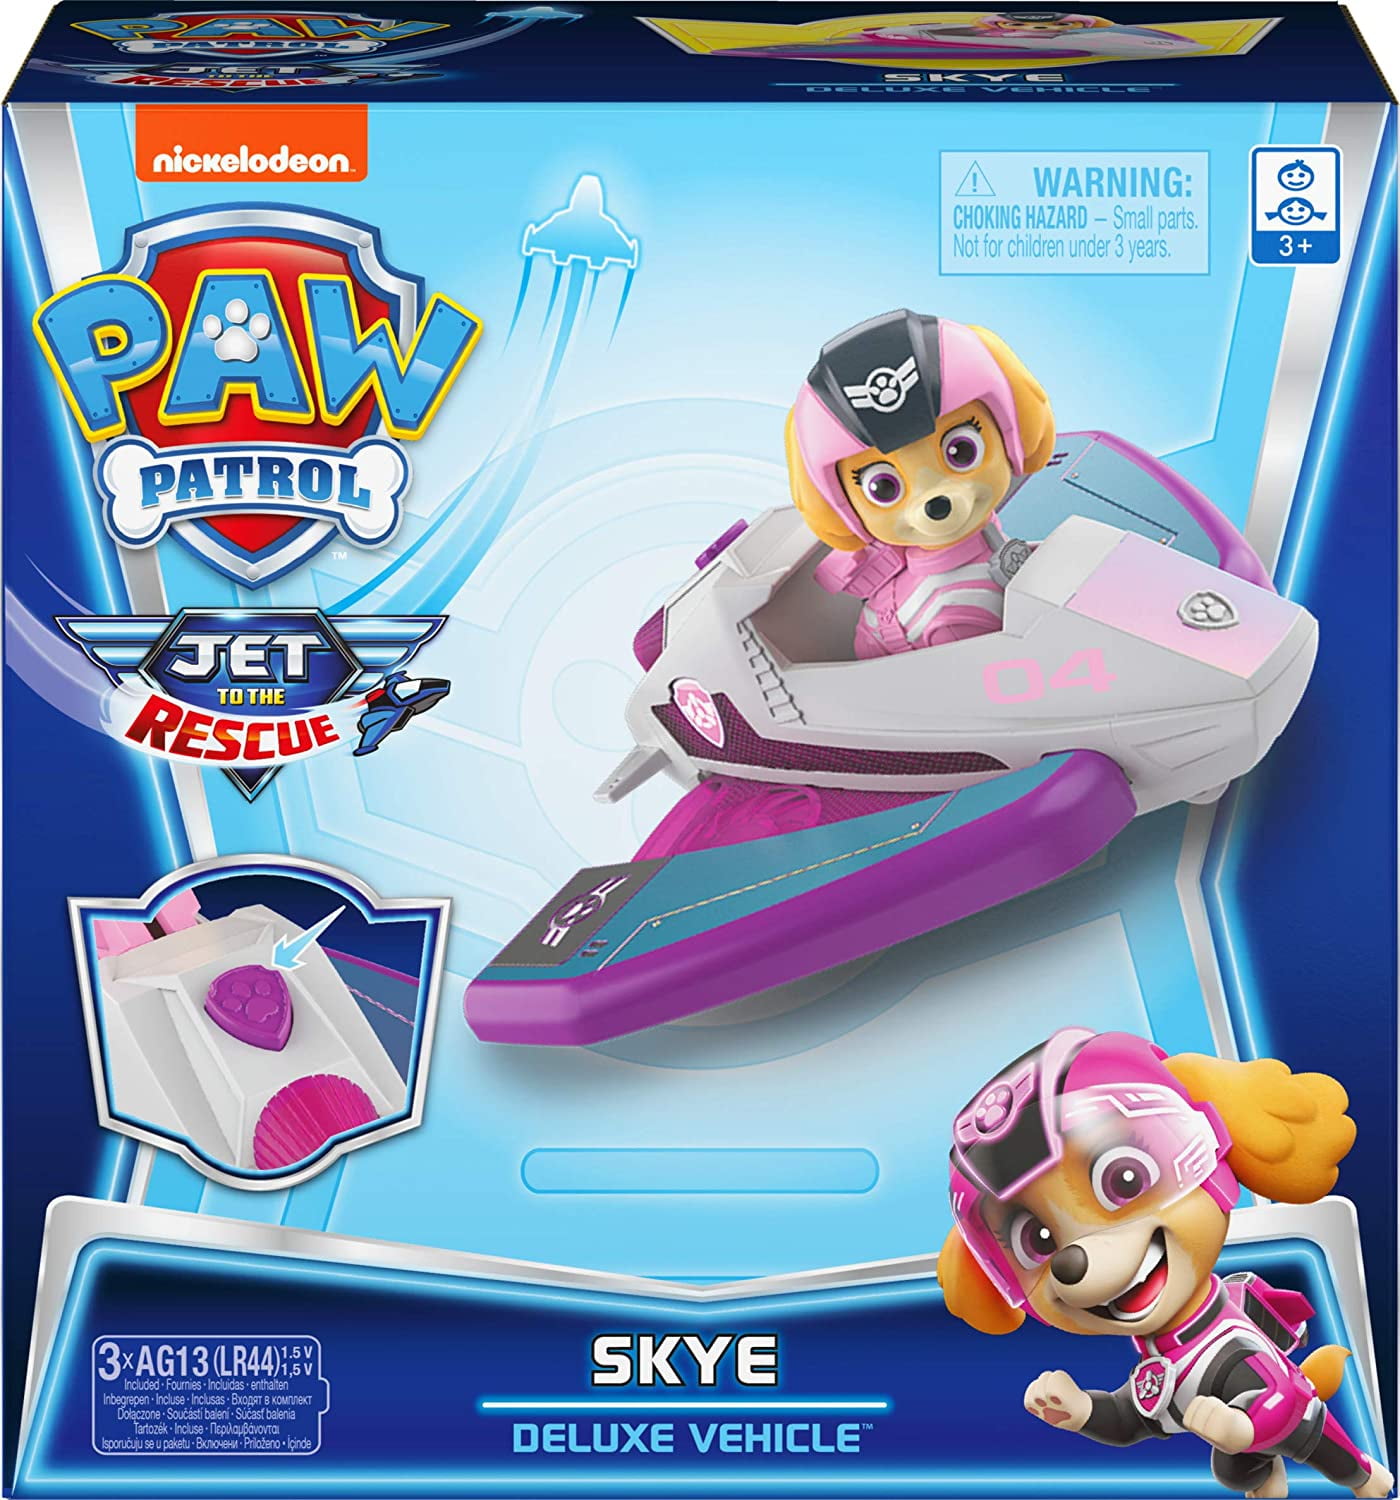 Best Rescues from Skye, Zuma + MORE 🚁, PAW Patrol